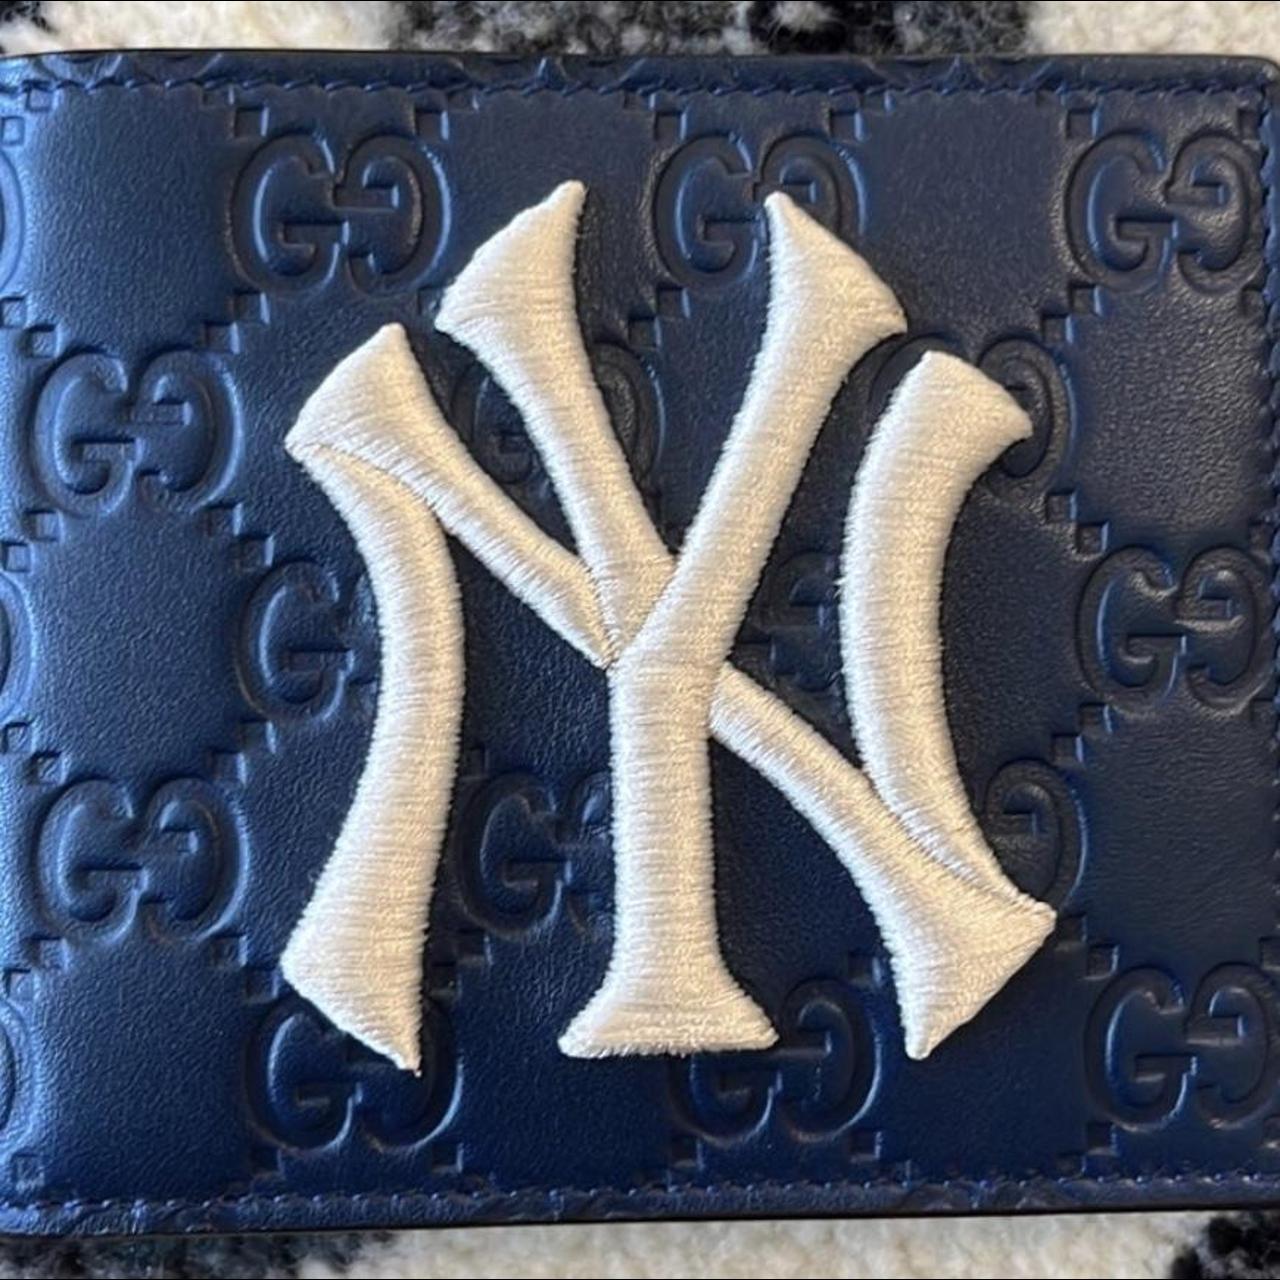 Gucci x New York Yankees Brand New It is 950 on - Depop